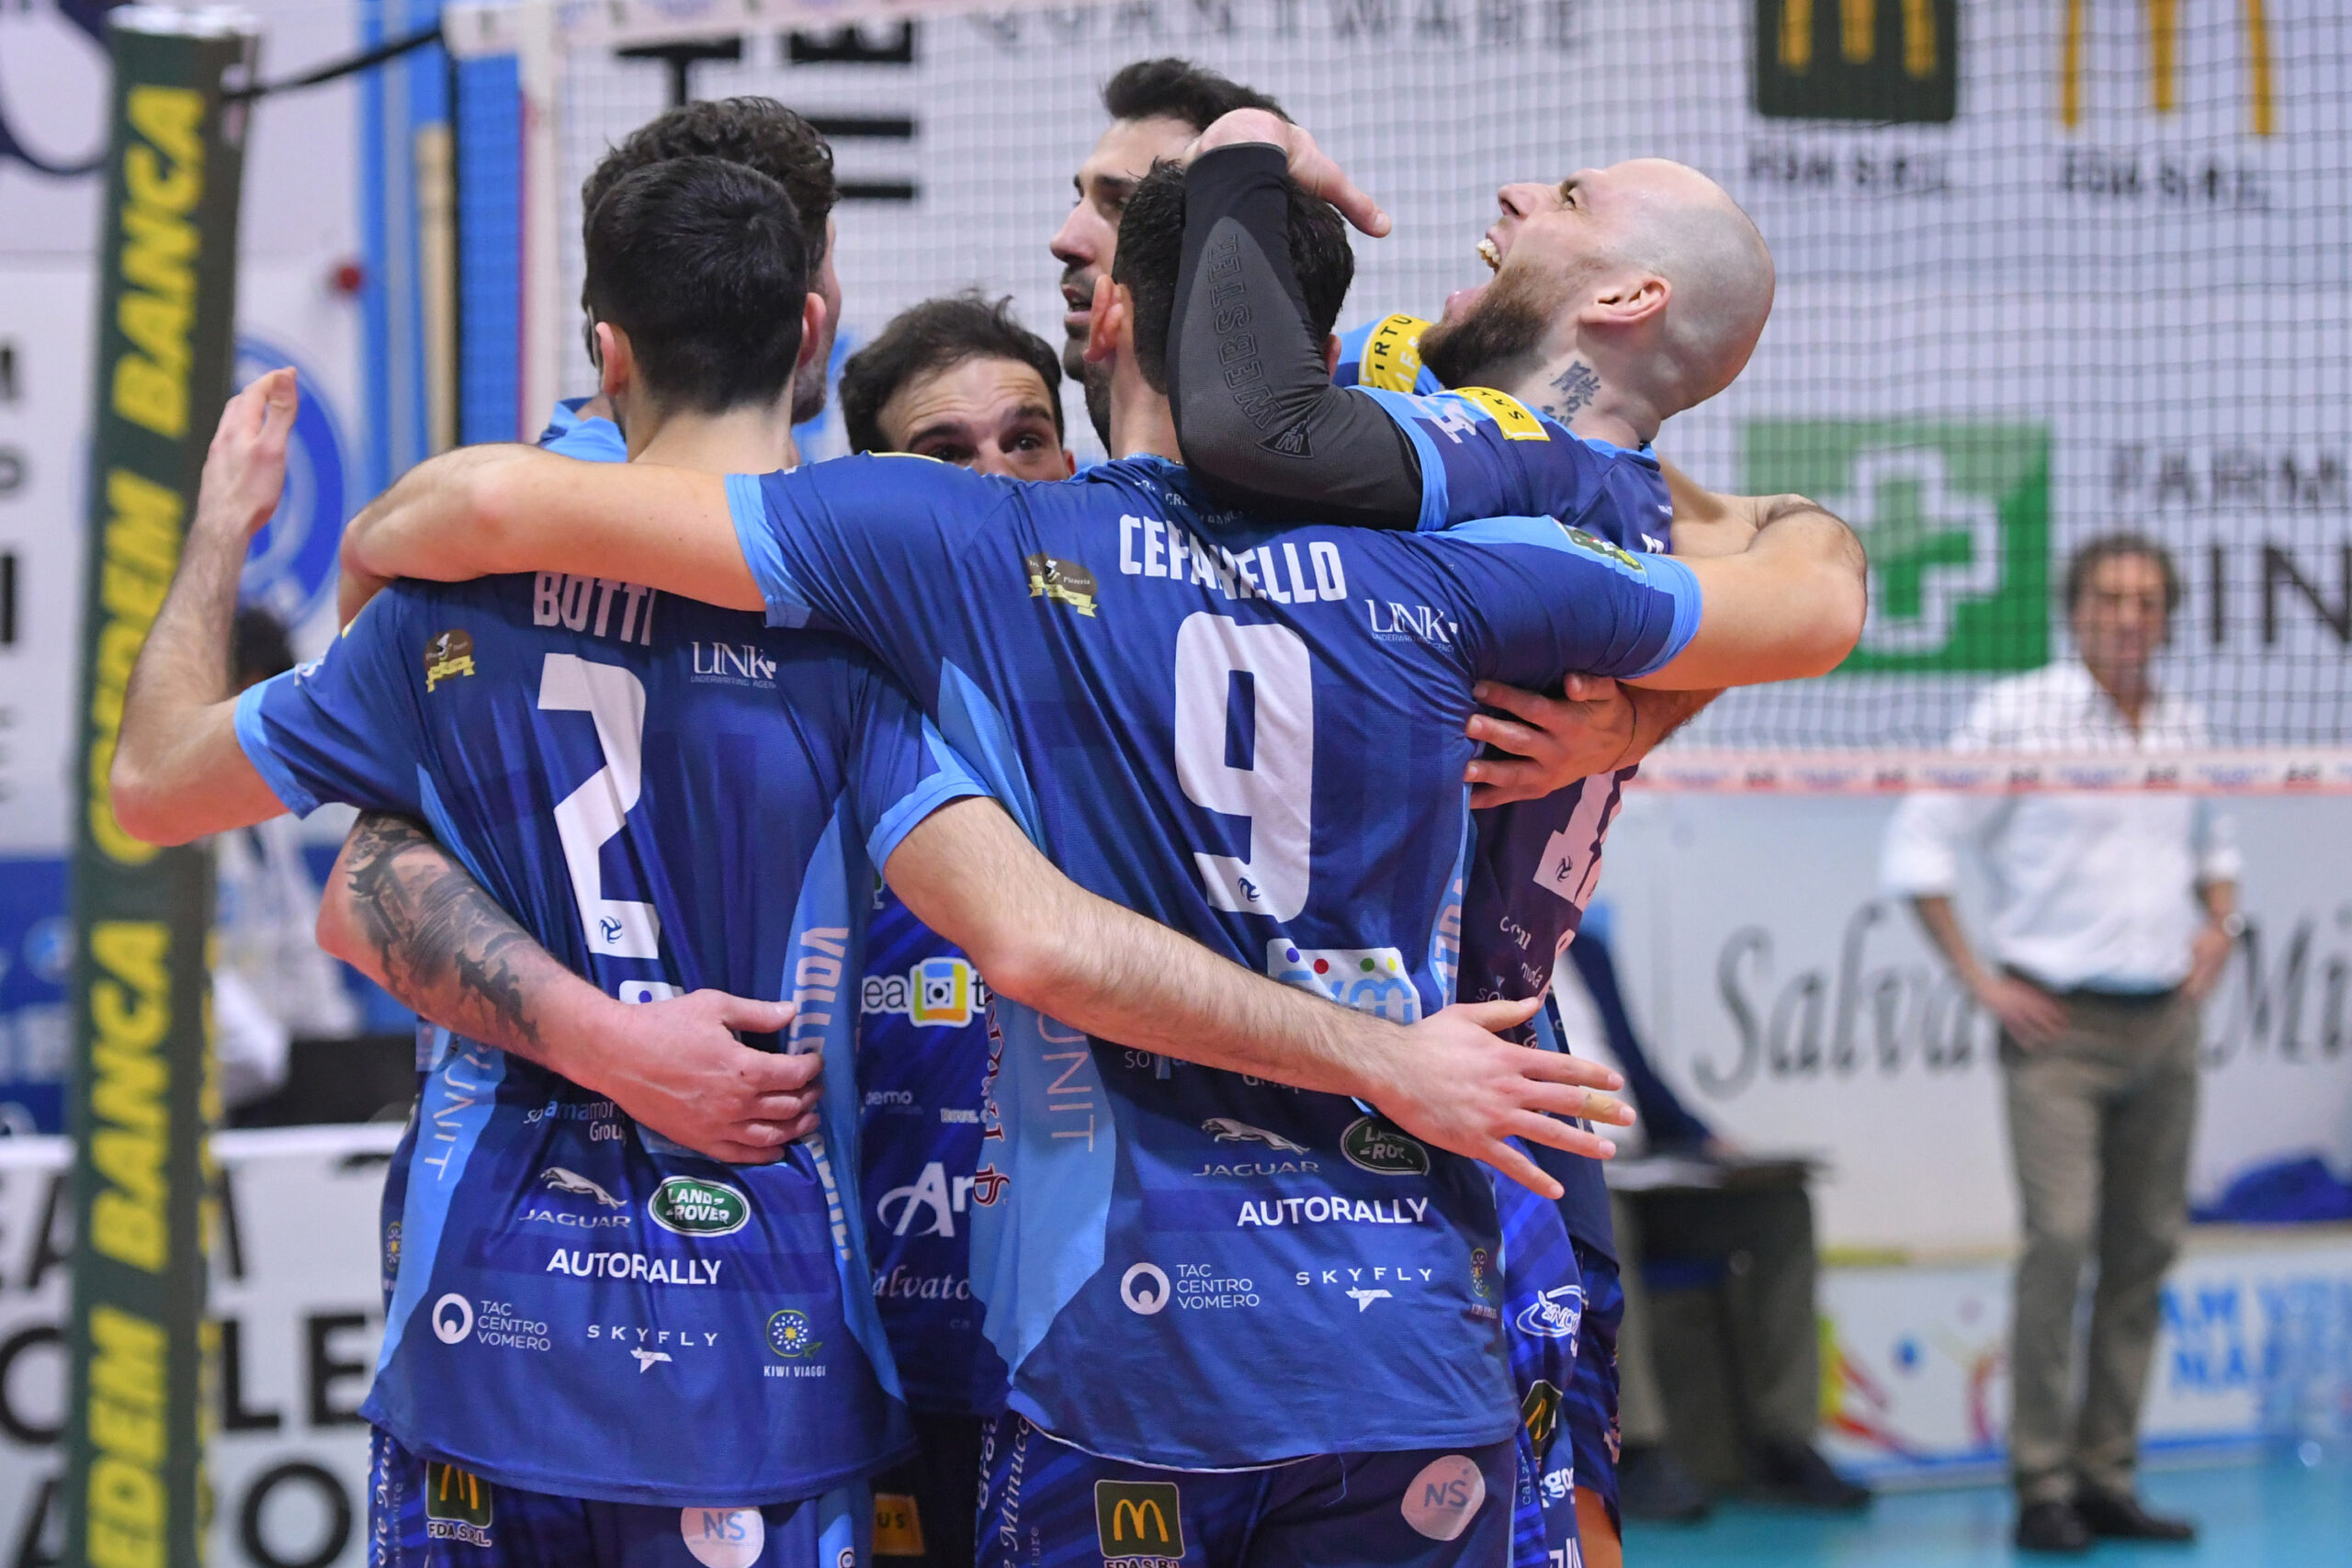 https://www.teamvolleynapoli.it/wp-content/uploads/2023/06/Napoli-Catania_372-scaled.jpg